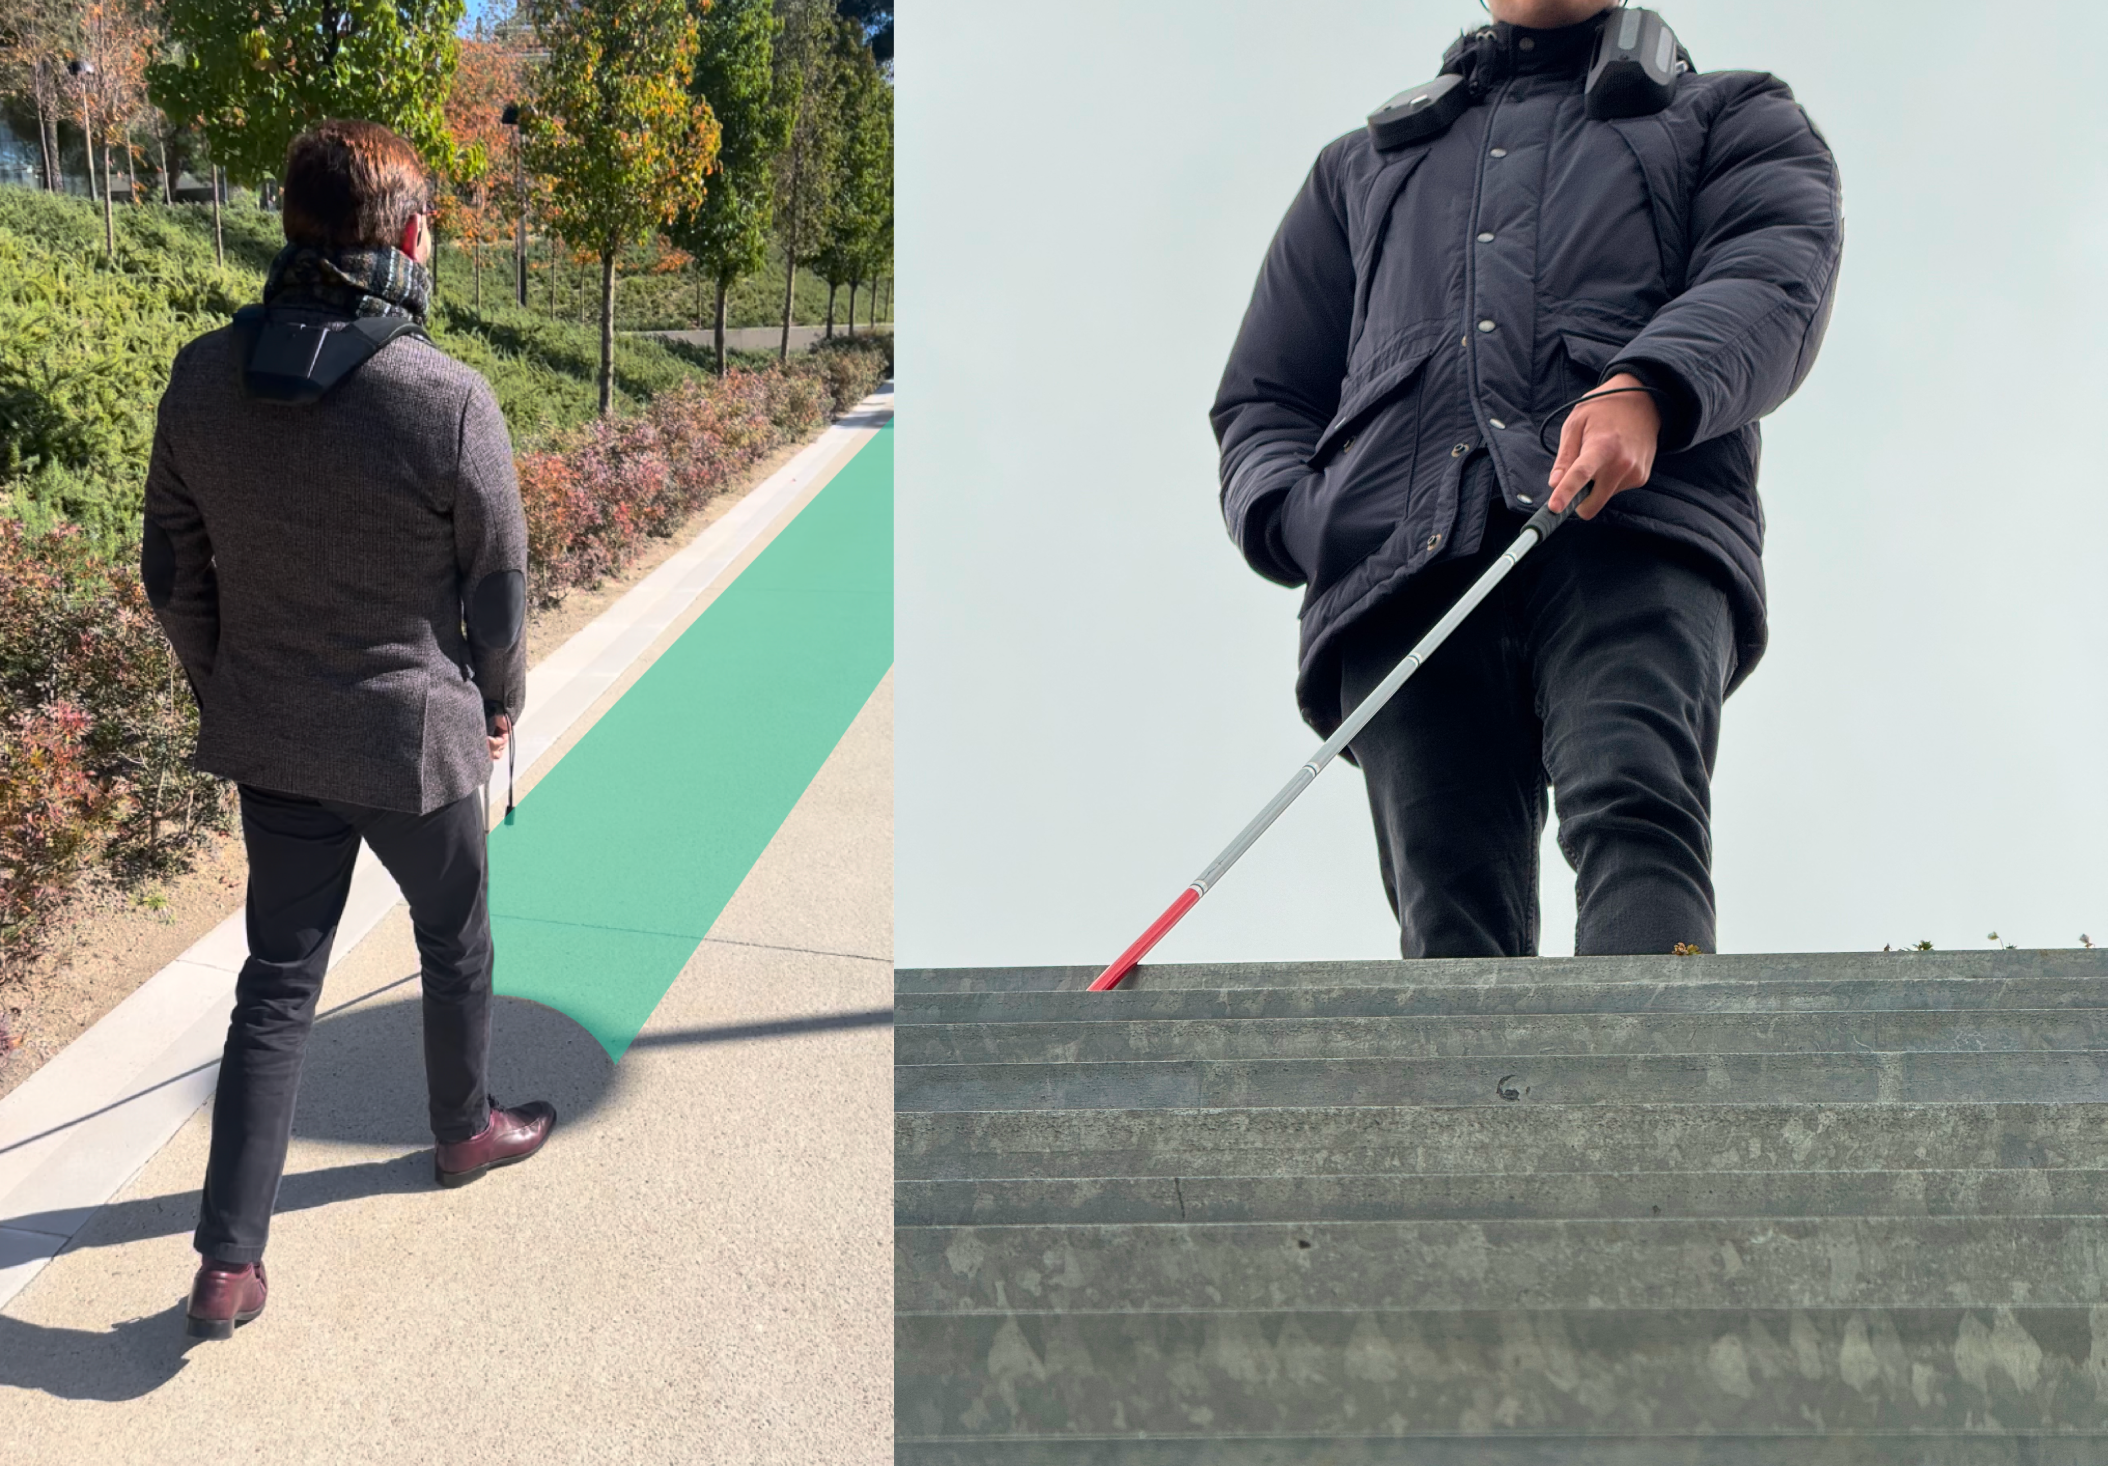 Two side-by-side images of individuals using the biped navigation device. On the left, a person viewed from behind, wearing a gray coat and using a white cane, walks along a garden path. On the right, a person descends a set of outdoor stairs, with the biped device on their shoulders and a cane in hand. Text to the right proclaims 'We're breaking down barriers to create inclusive environments,' highlighting biped's commitment to enhancing workspace accessibility with technology like obstacle detection and GPS navigation.